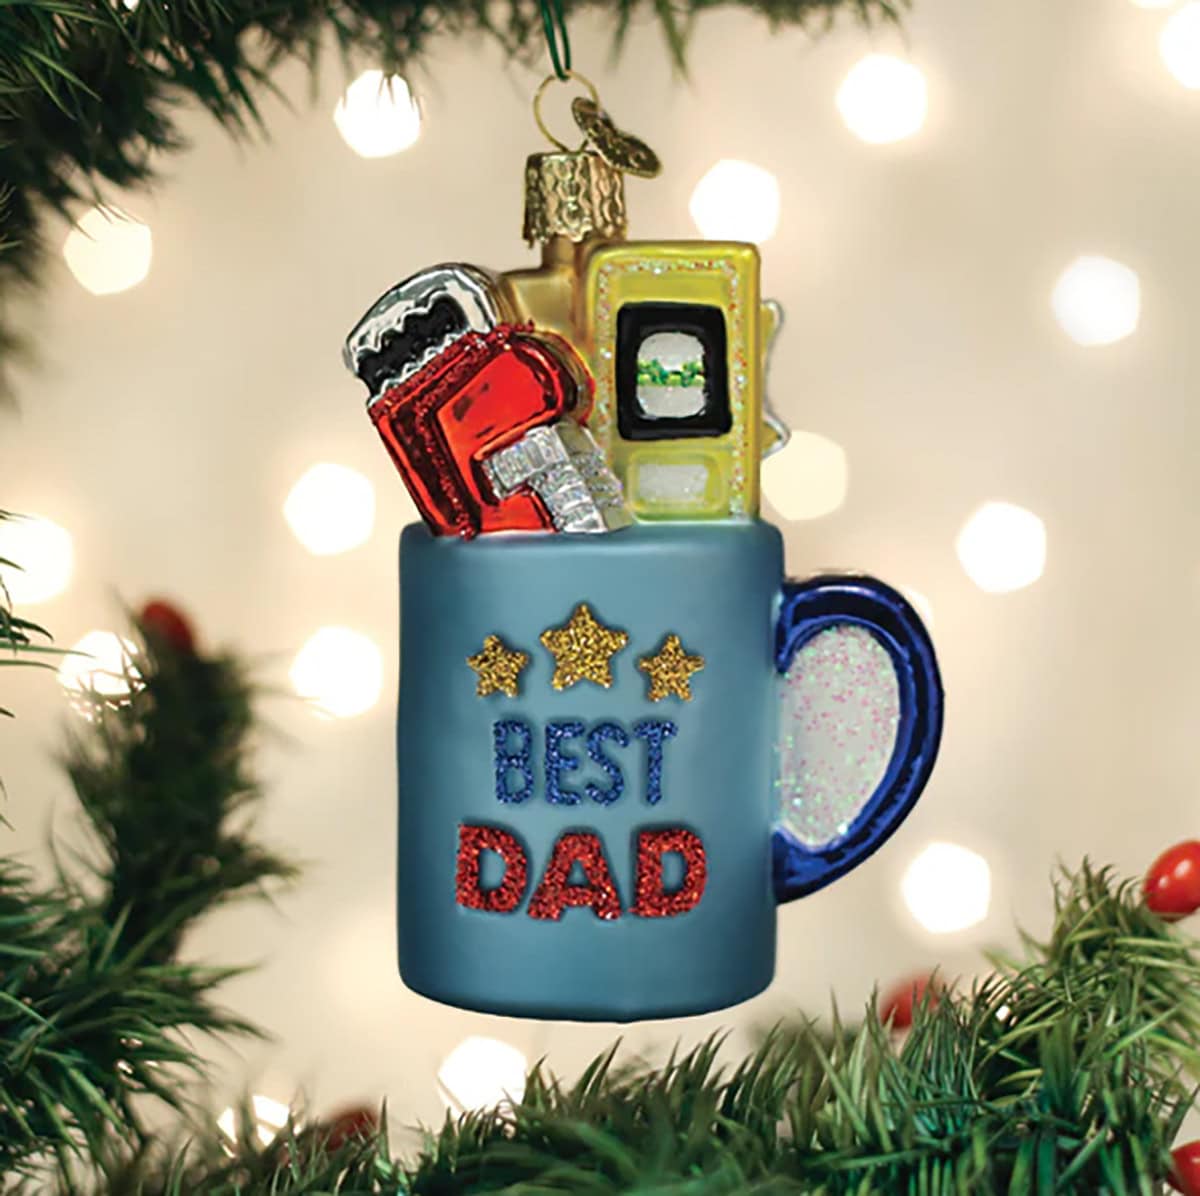 Great Gift Ideas For Grandfather: The Best Gifts For Grandpa To Put A Smile On His Face  8 Daily Mom, Magazine For Families